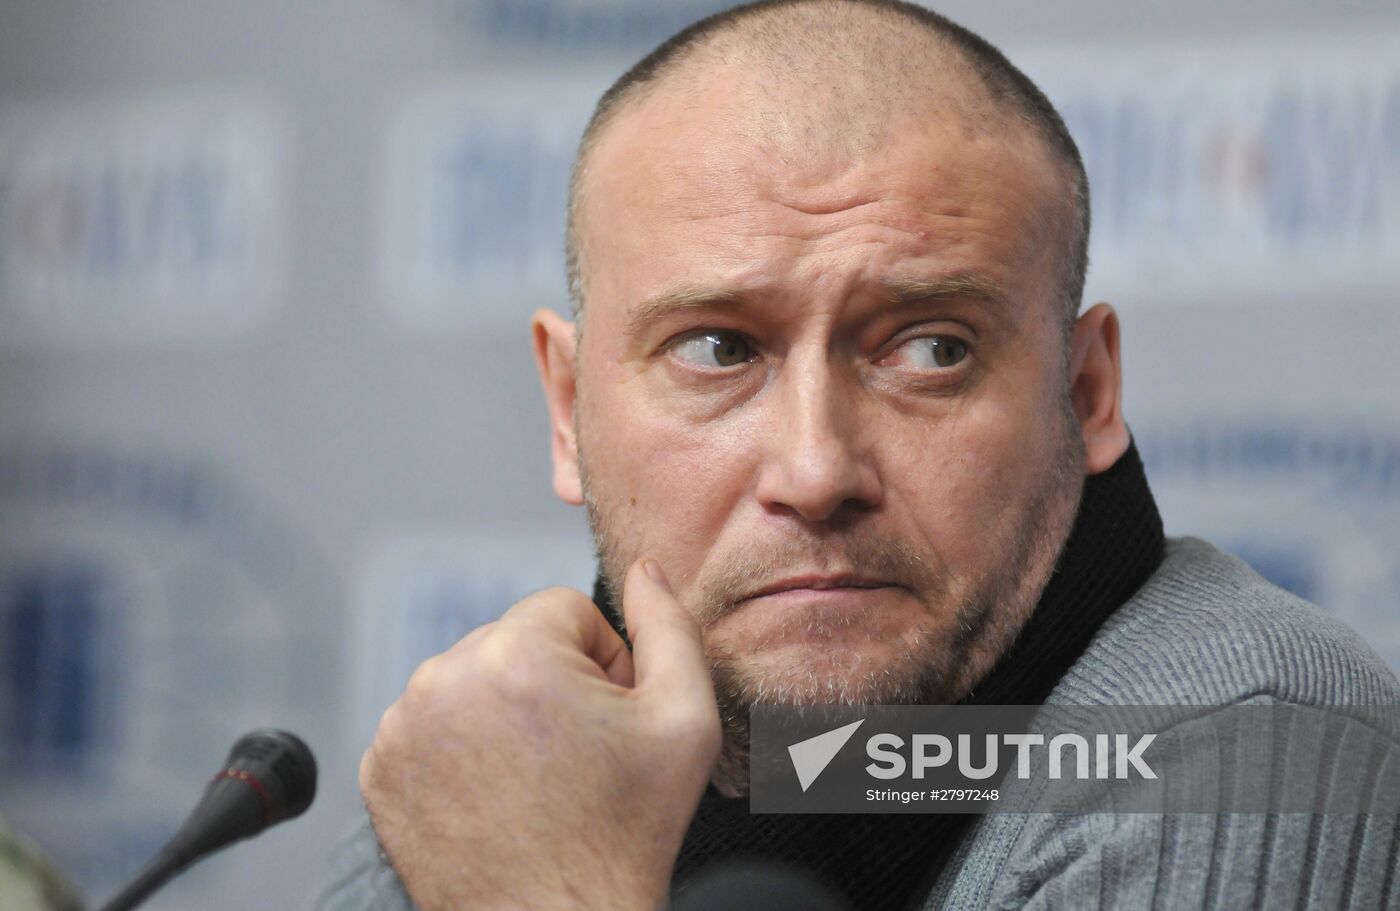 Right Sector Ex-Leader Dmitro Yarosh News Conference in Lvov